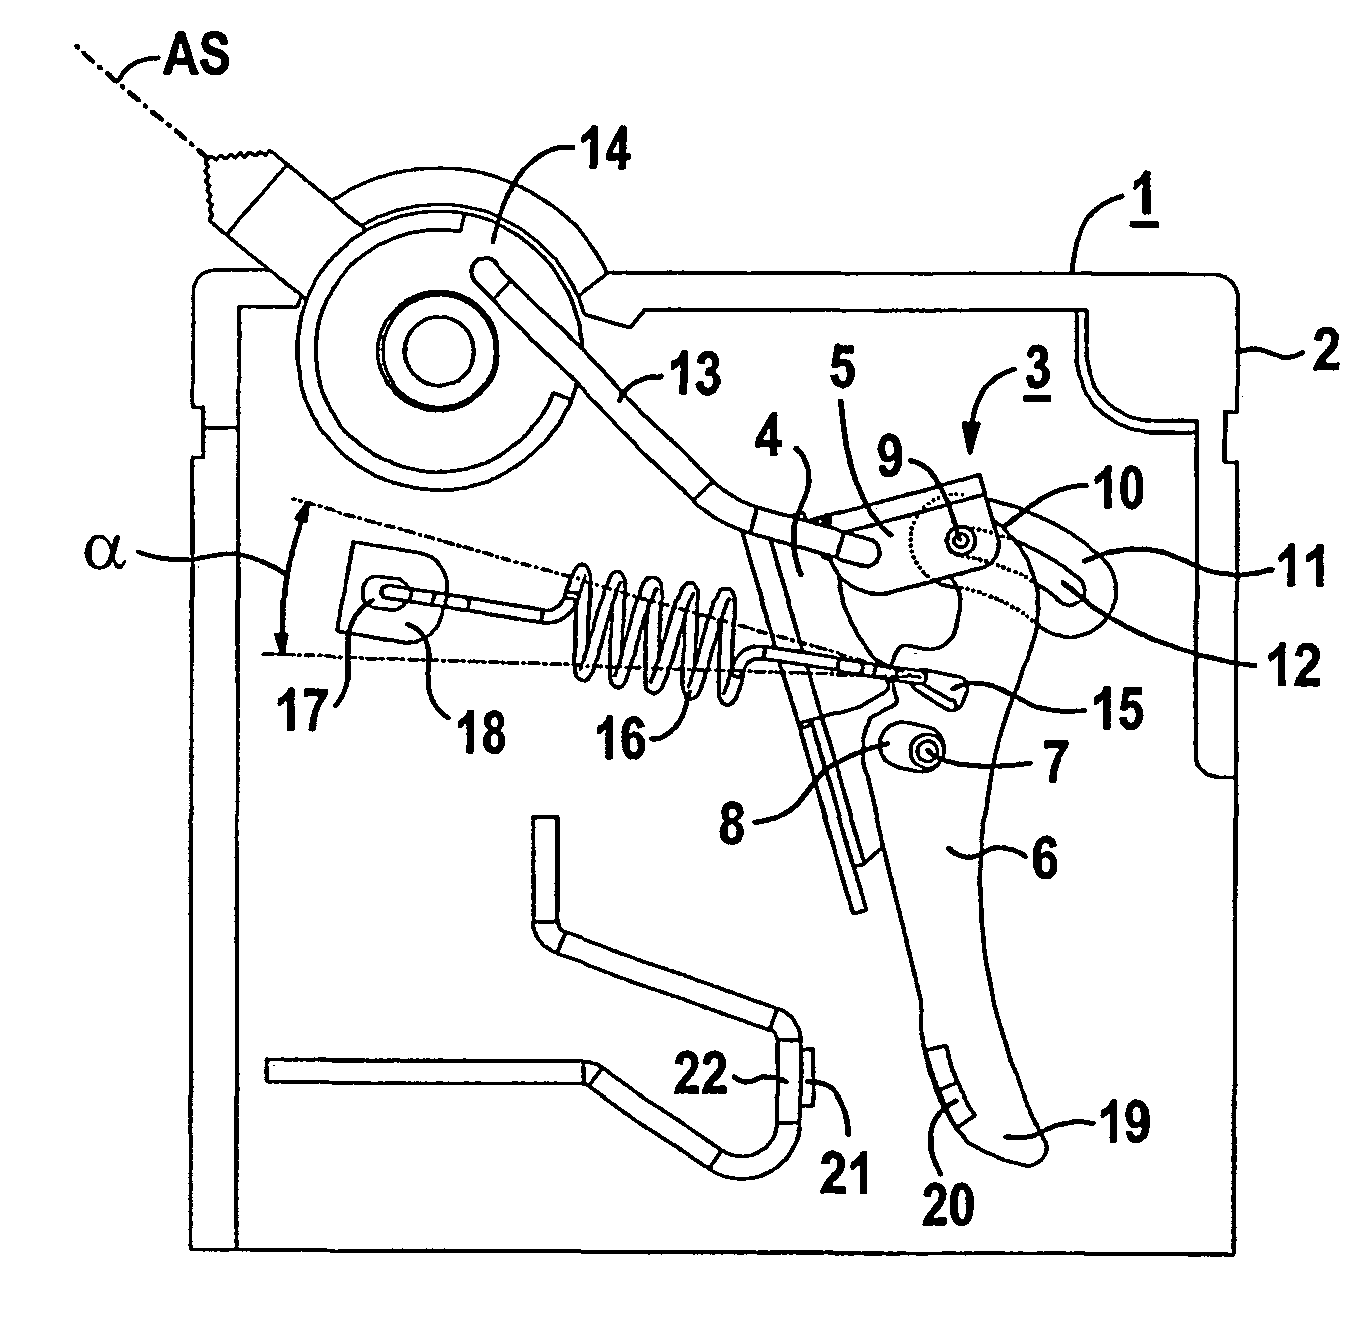 Switching device comprising a breaker mechanism